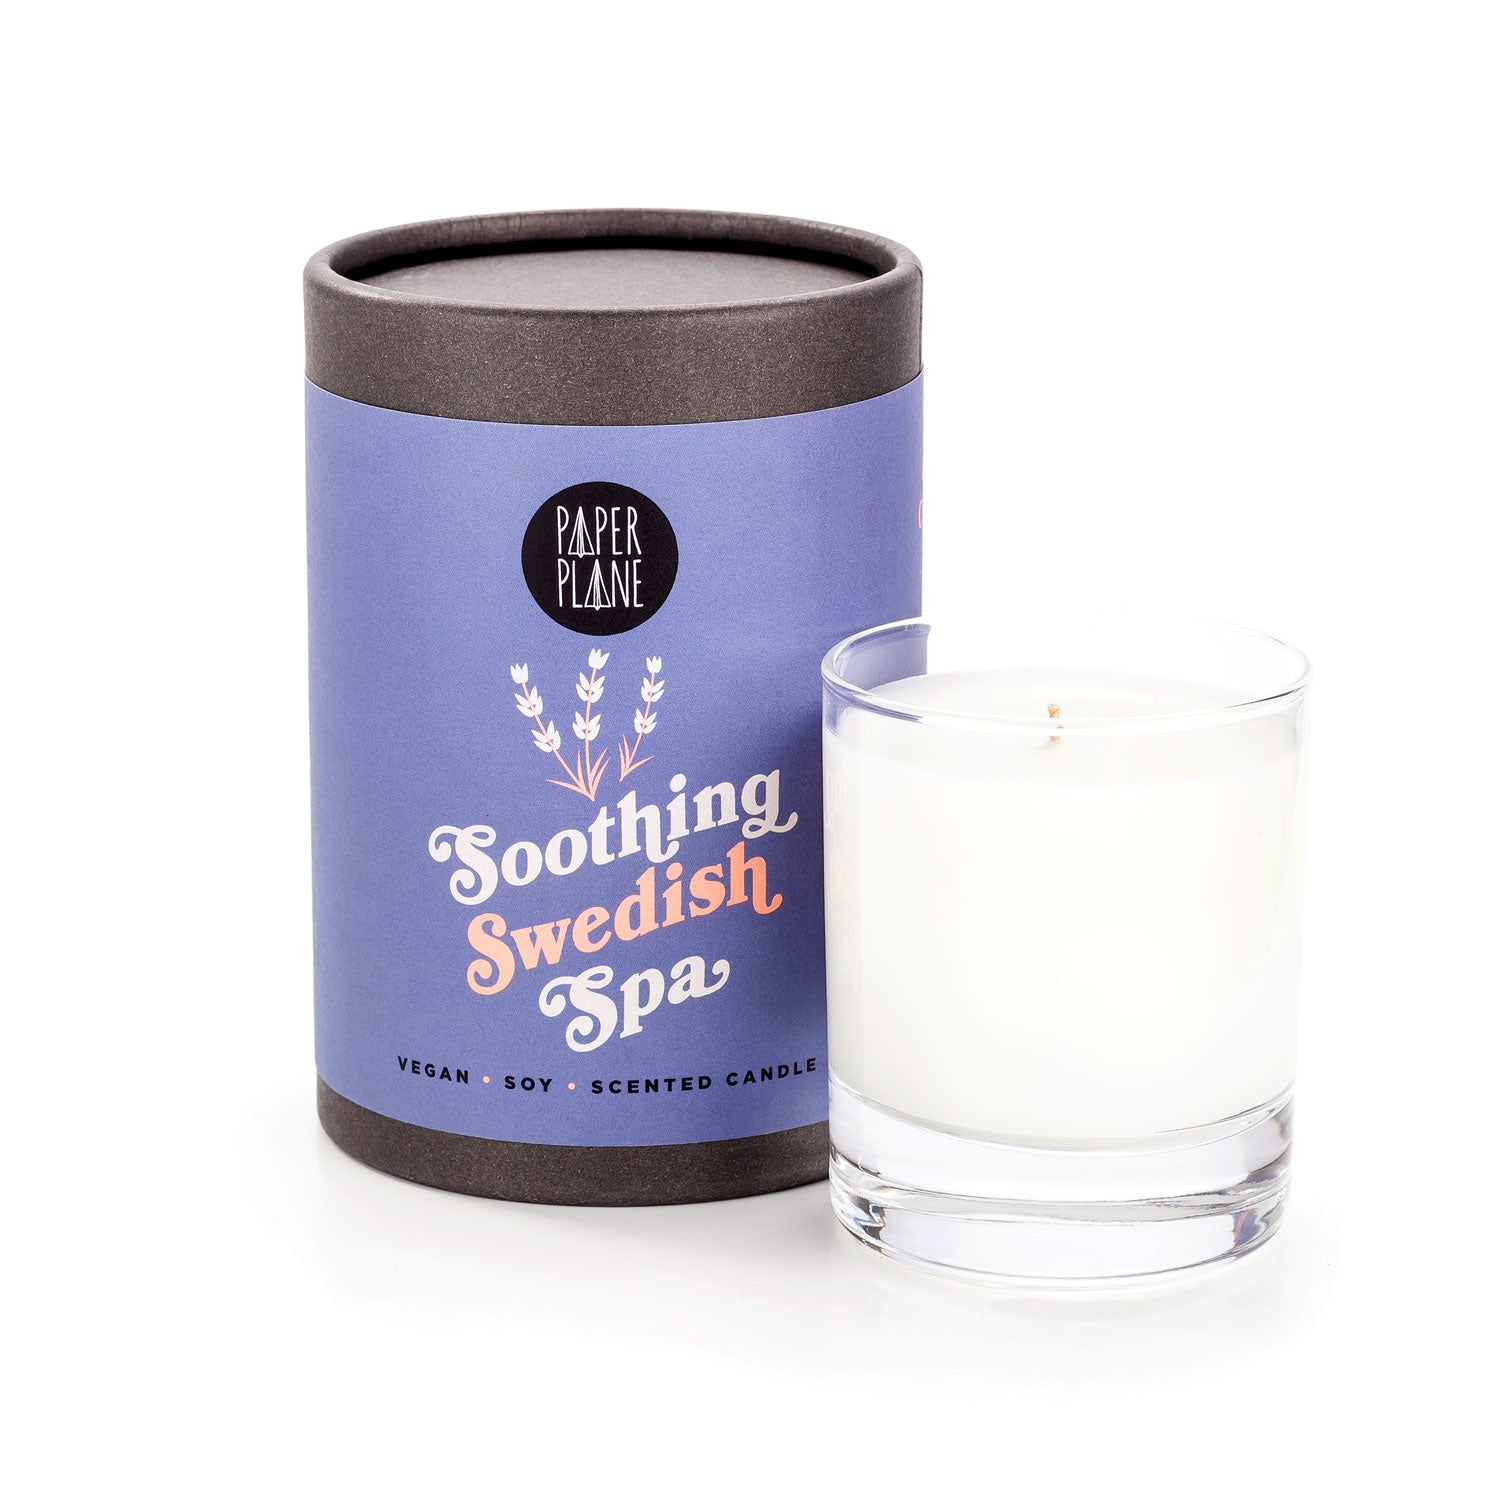 Soothing Swedish Spa Vegan Soy Candle